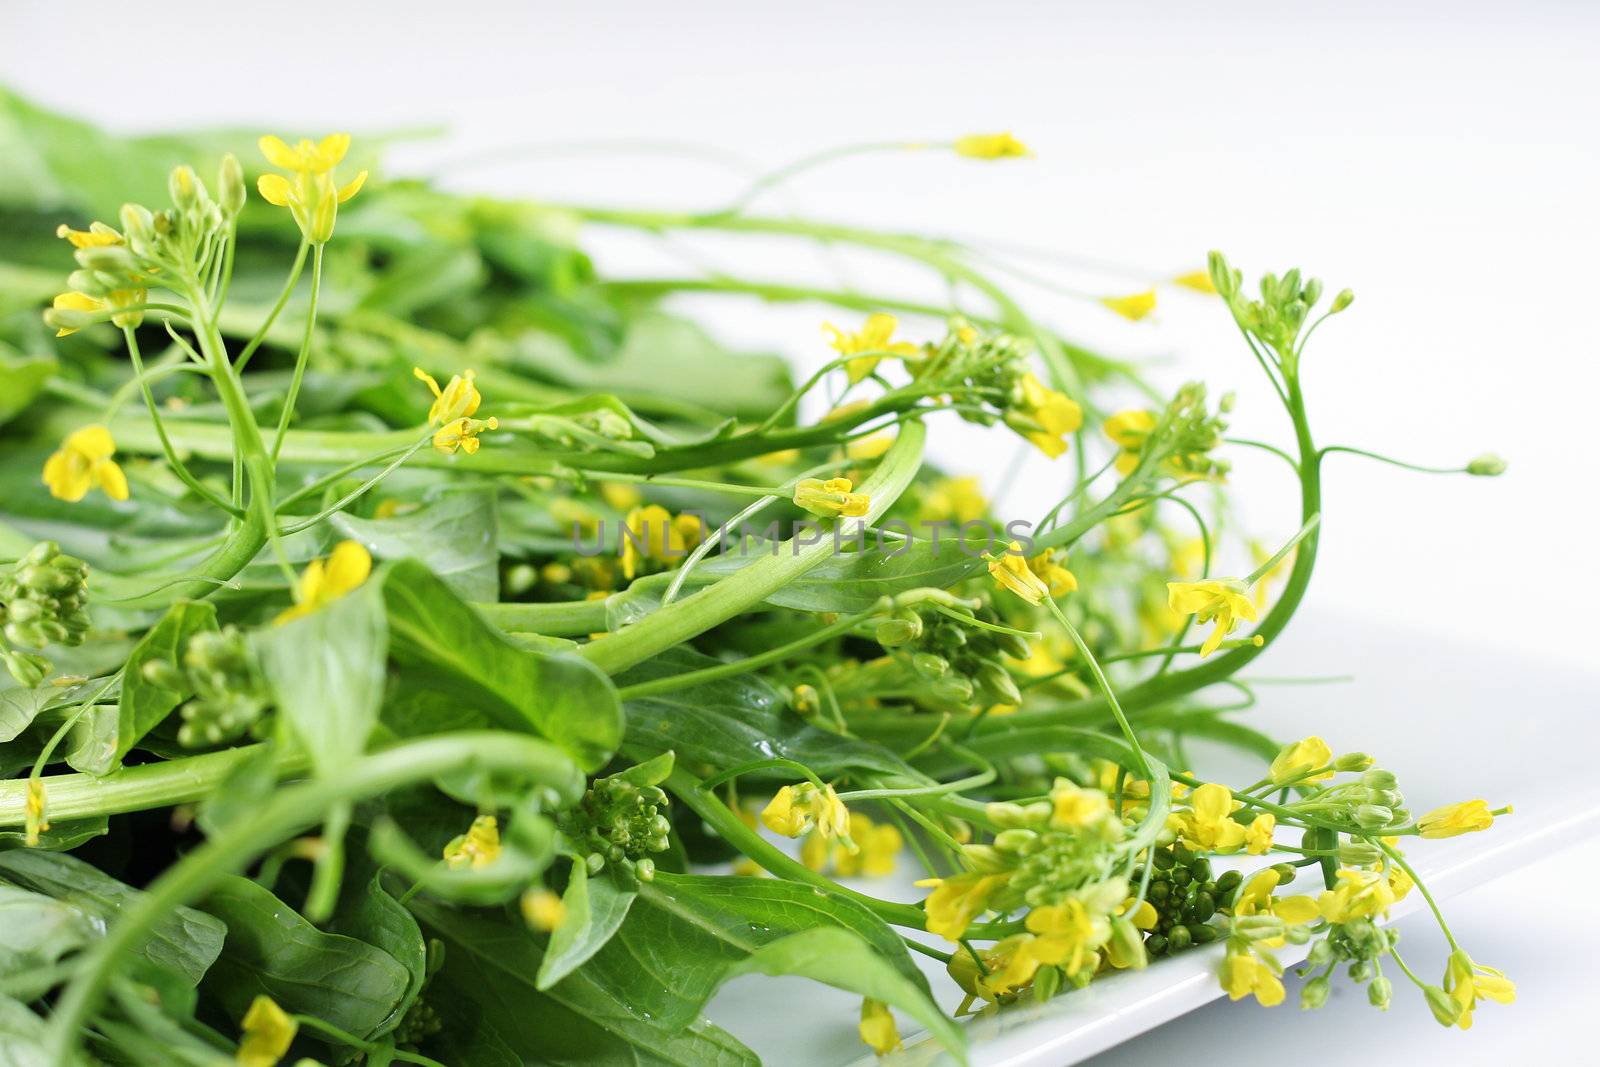 shot of baby greens with tiny yellow flowers by creativestock